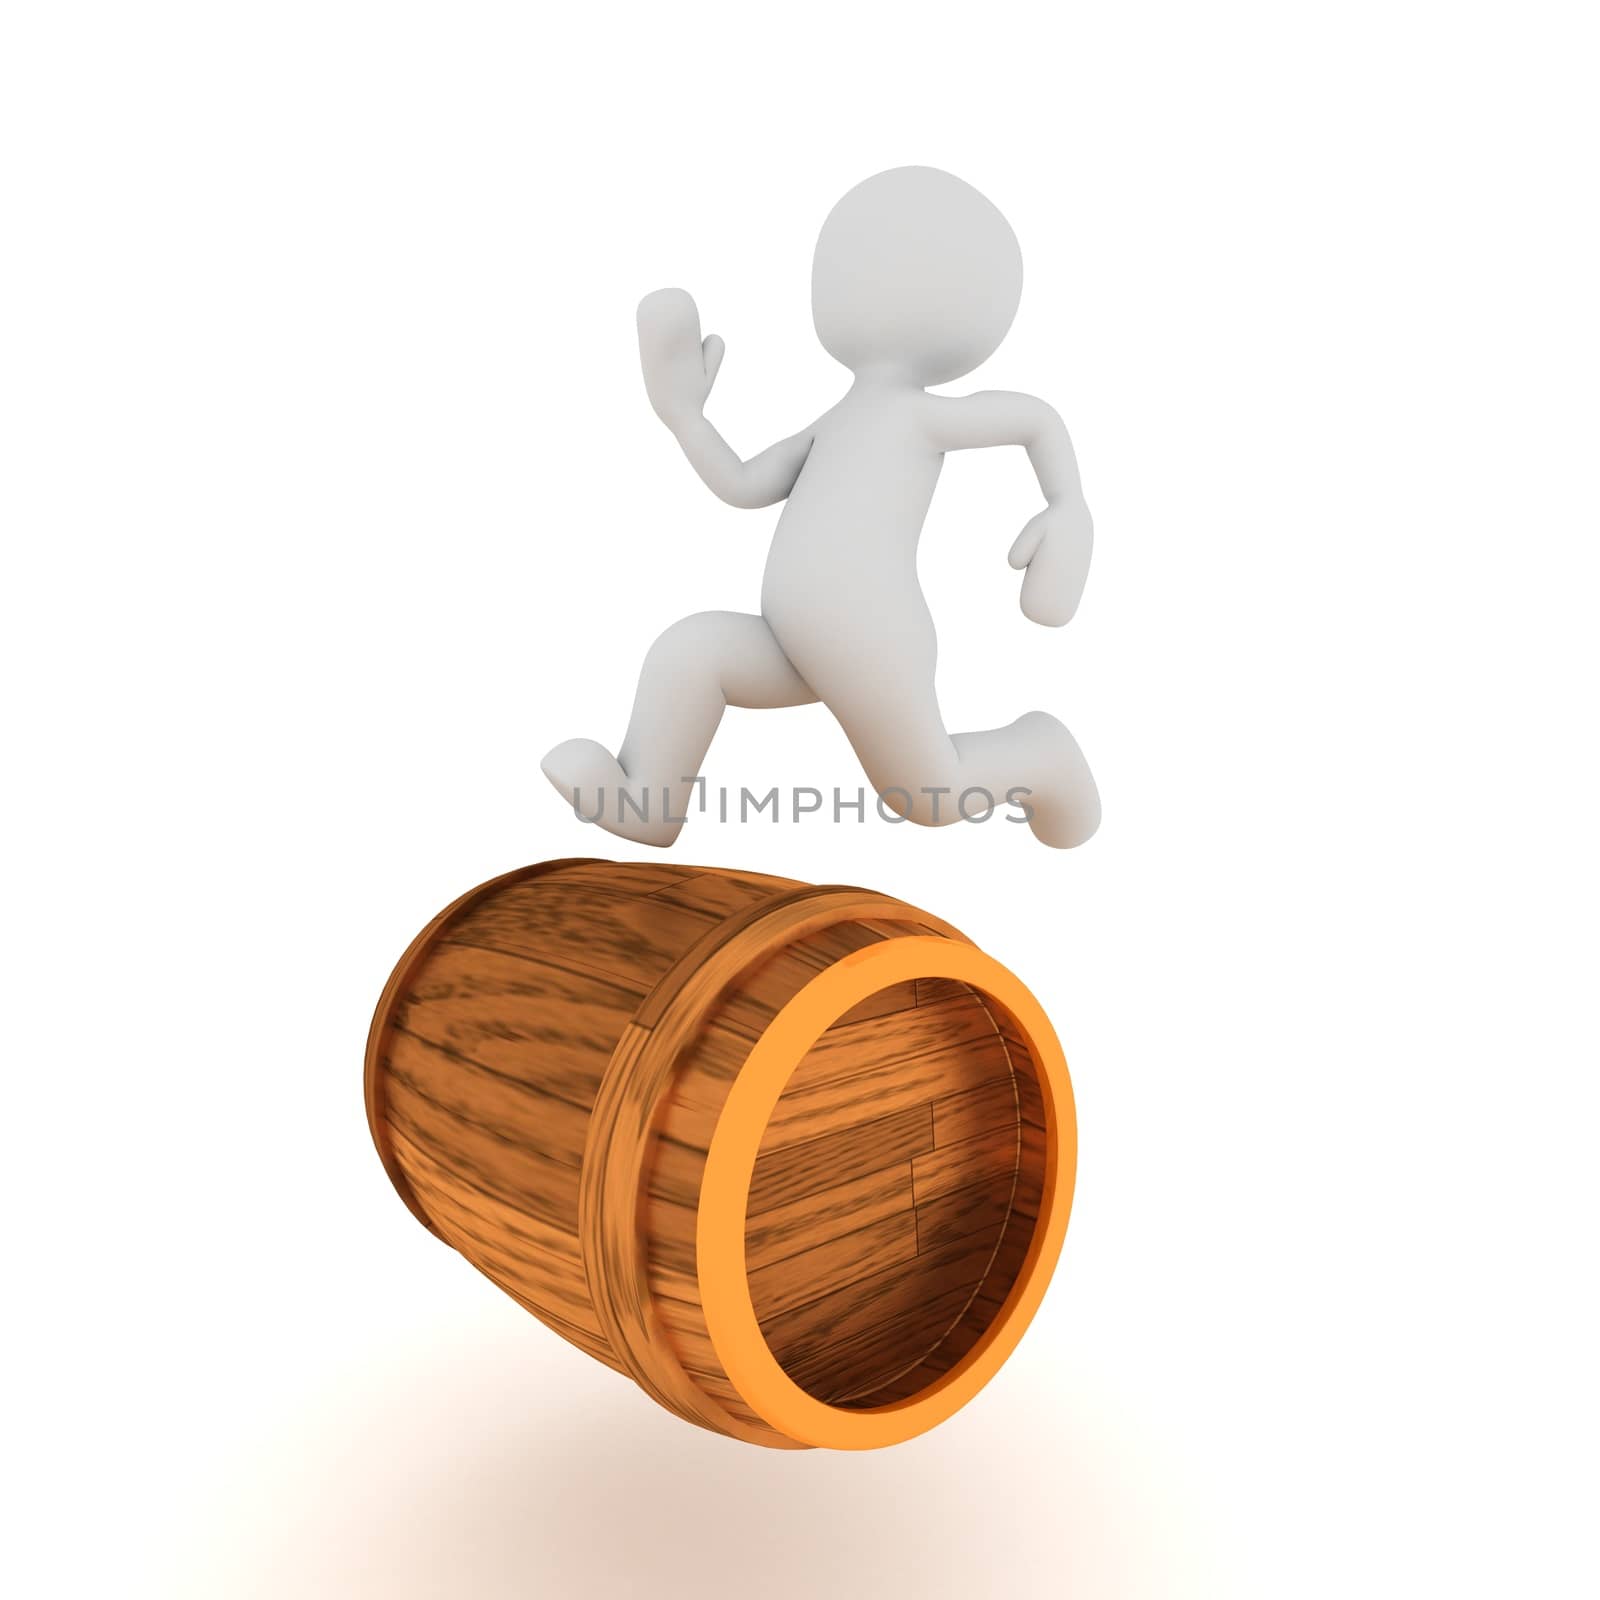 A 3d character running on a wine barrel.